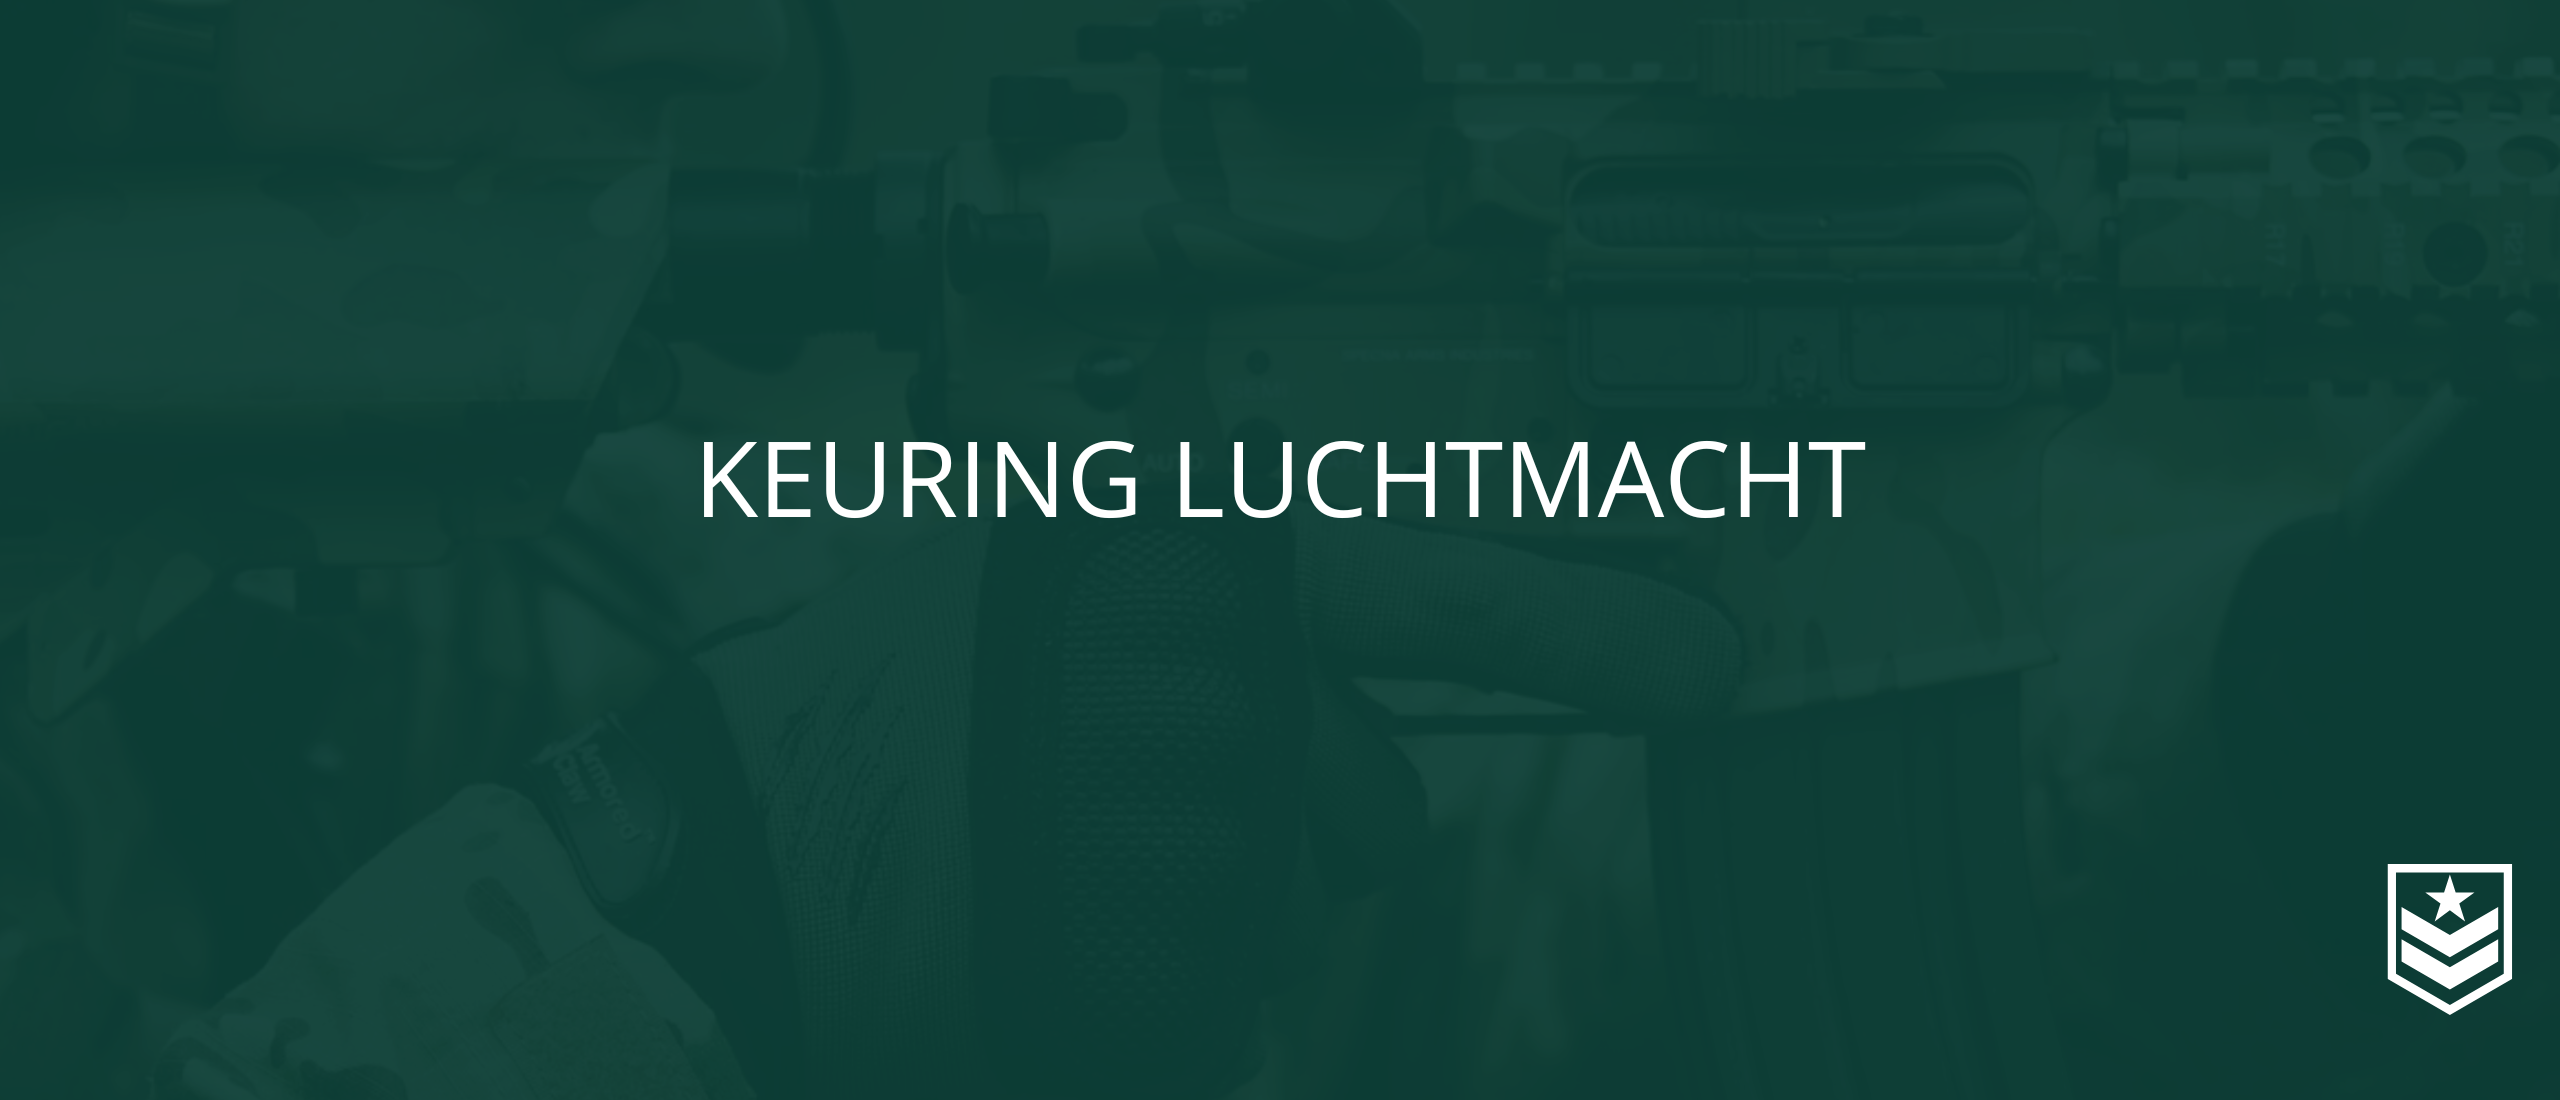 keuring luchtmacht